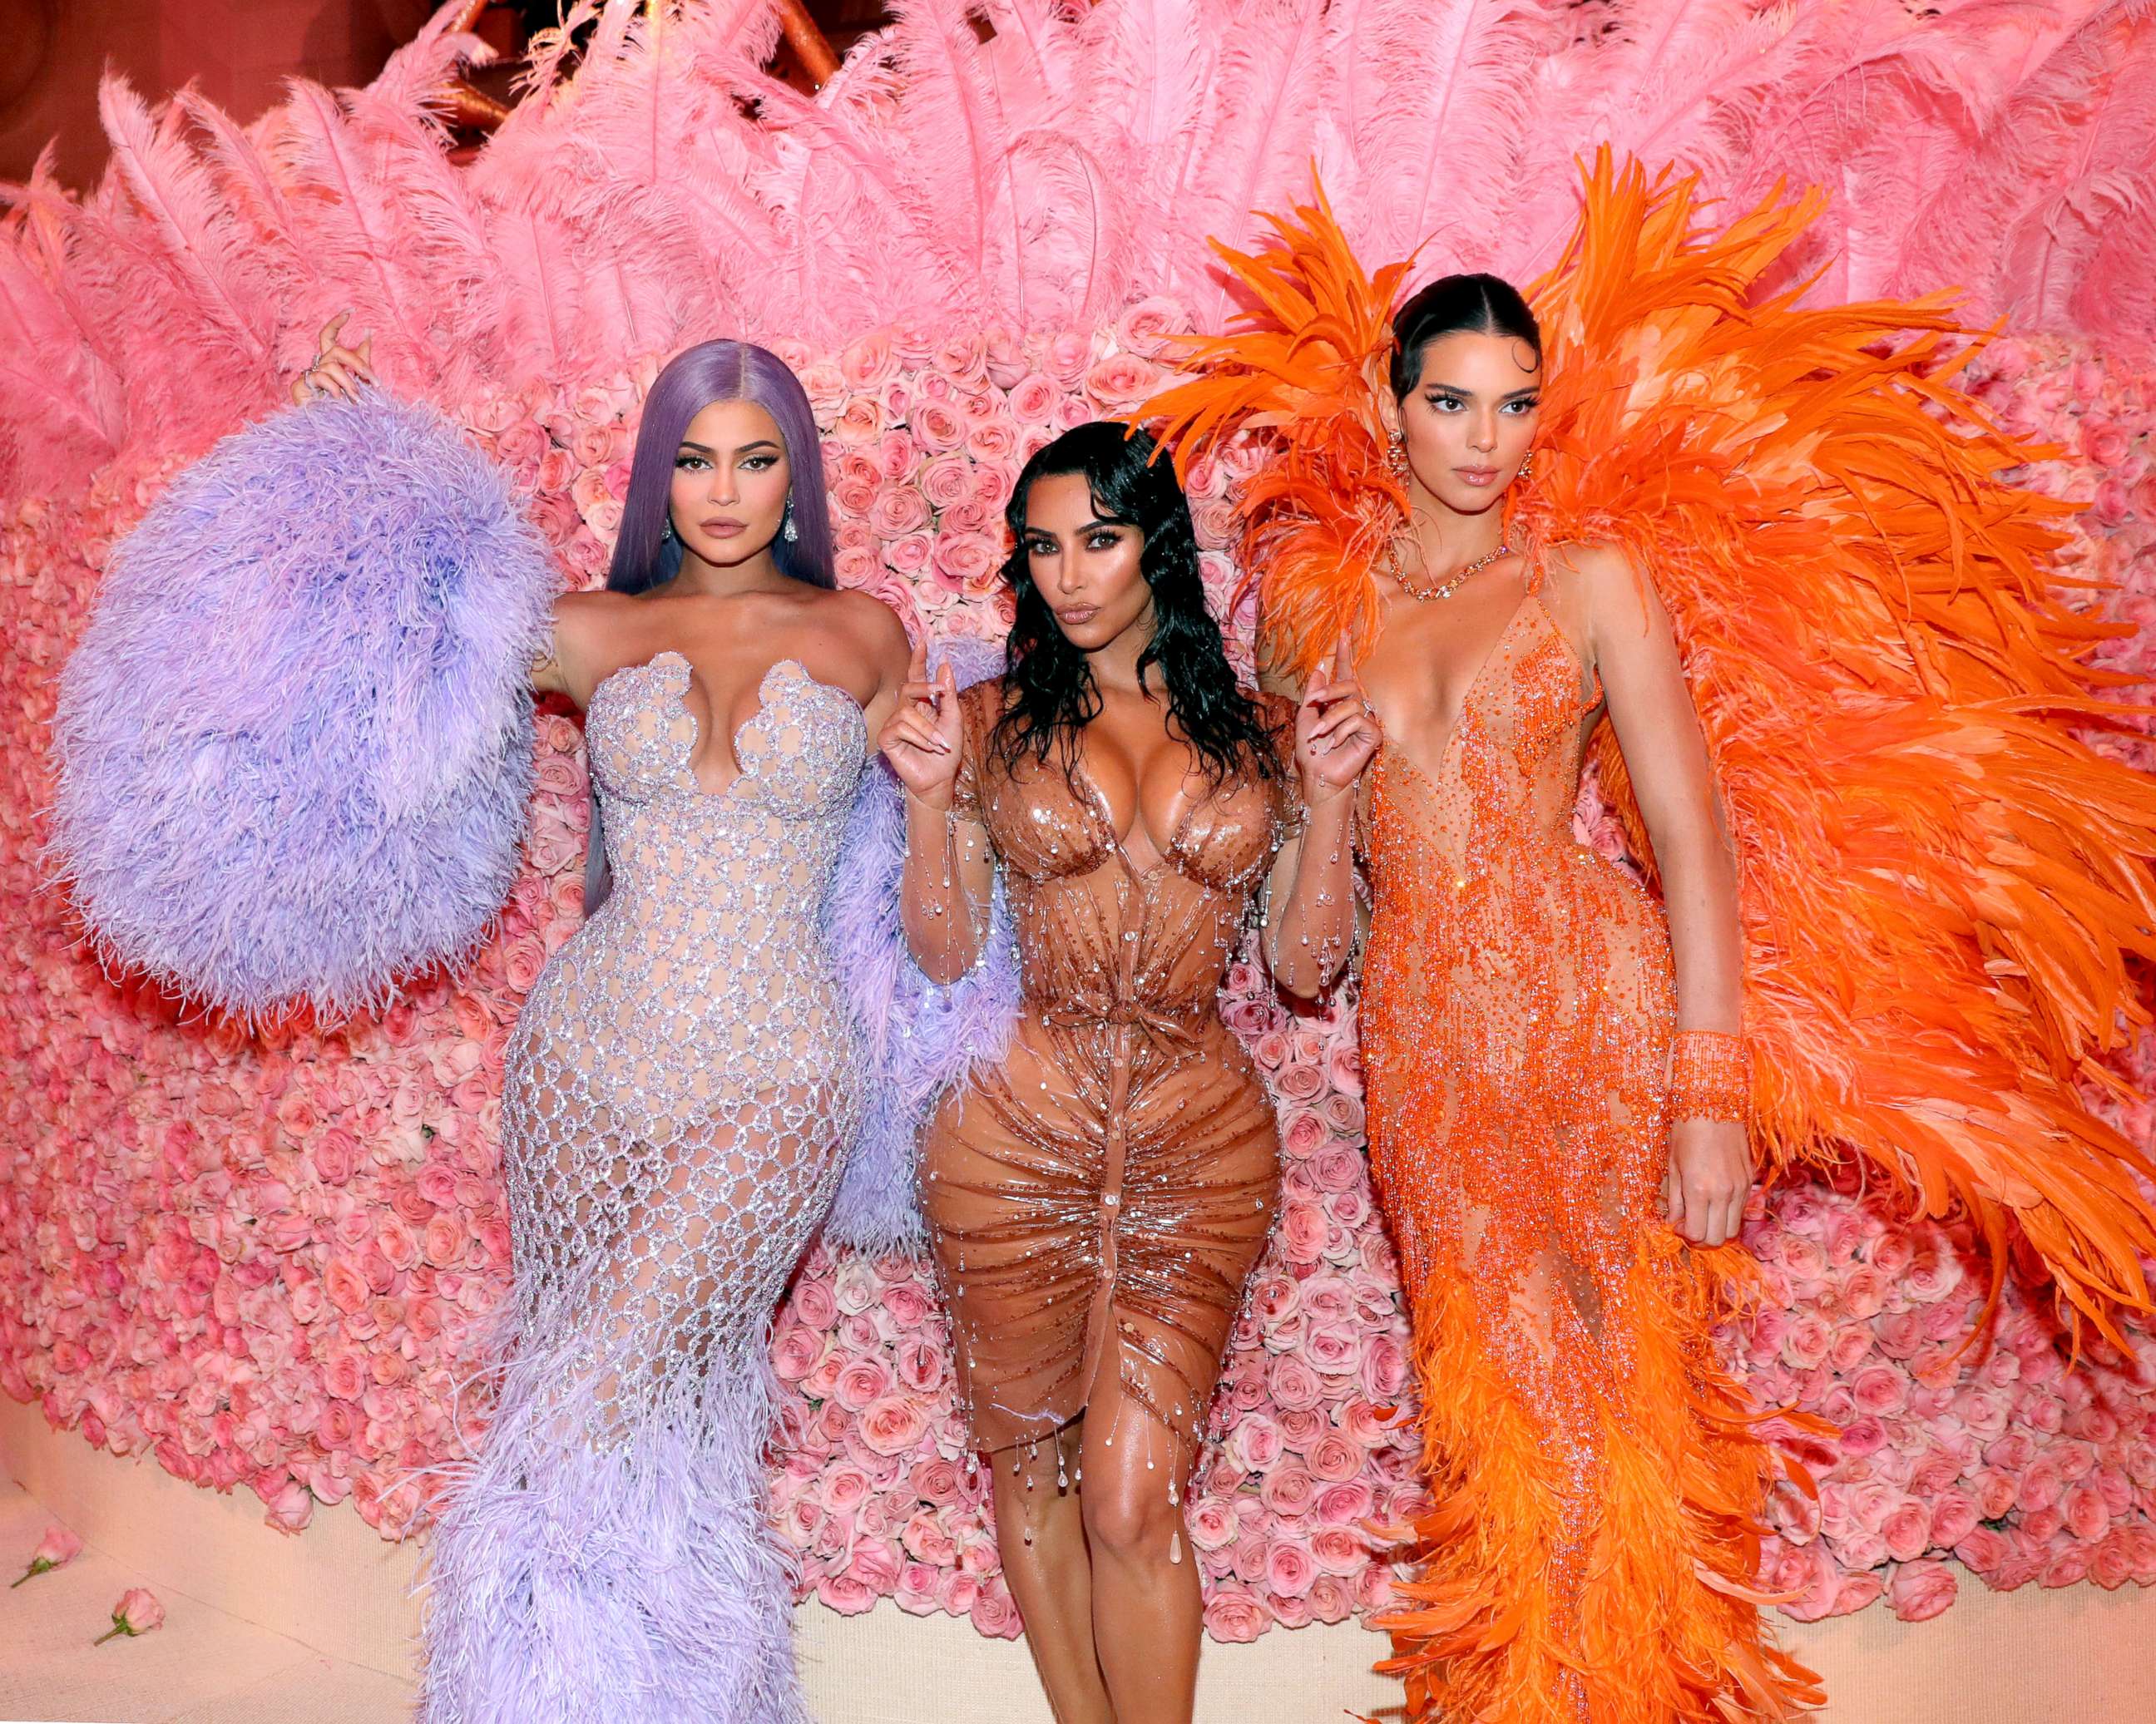 PHOTO: Kylie Jenner, Kim Kardashian West and Kendall Jenner attend The 2019 Met Gala Celebrating Camp: Notes on Fashion at Metropolitan Museum of Art, May 6, 2019, in New York City.